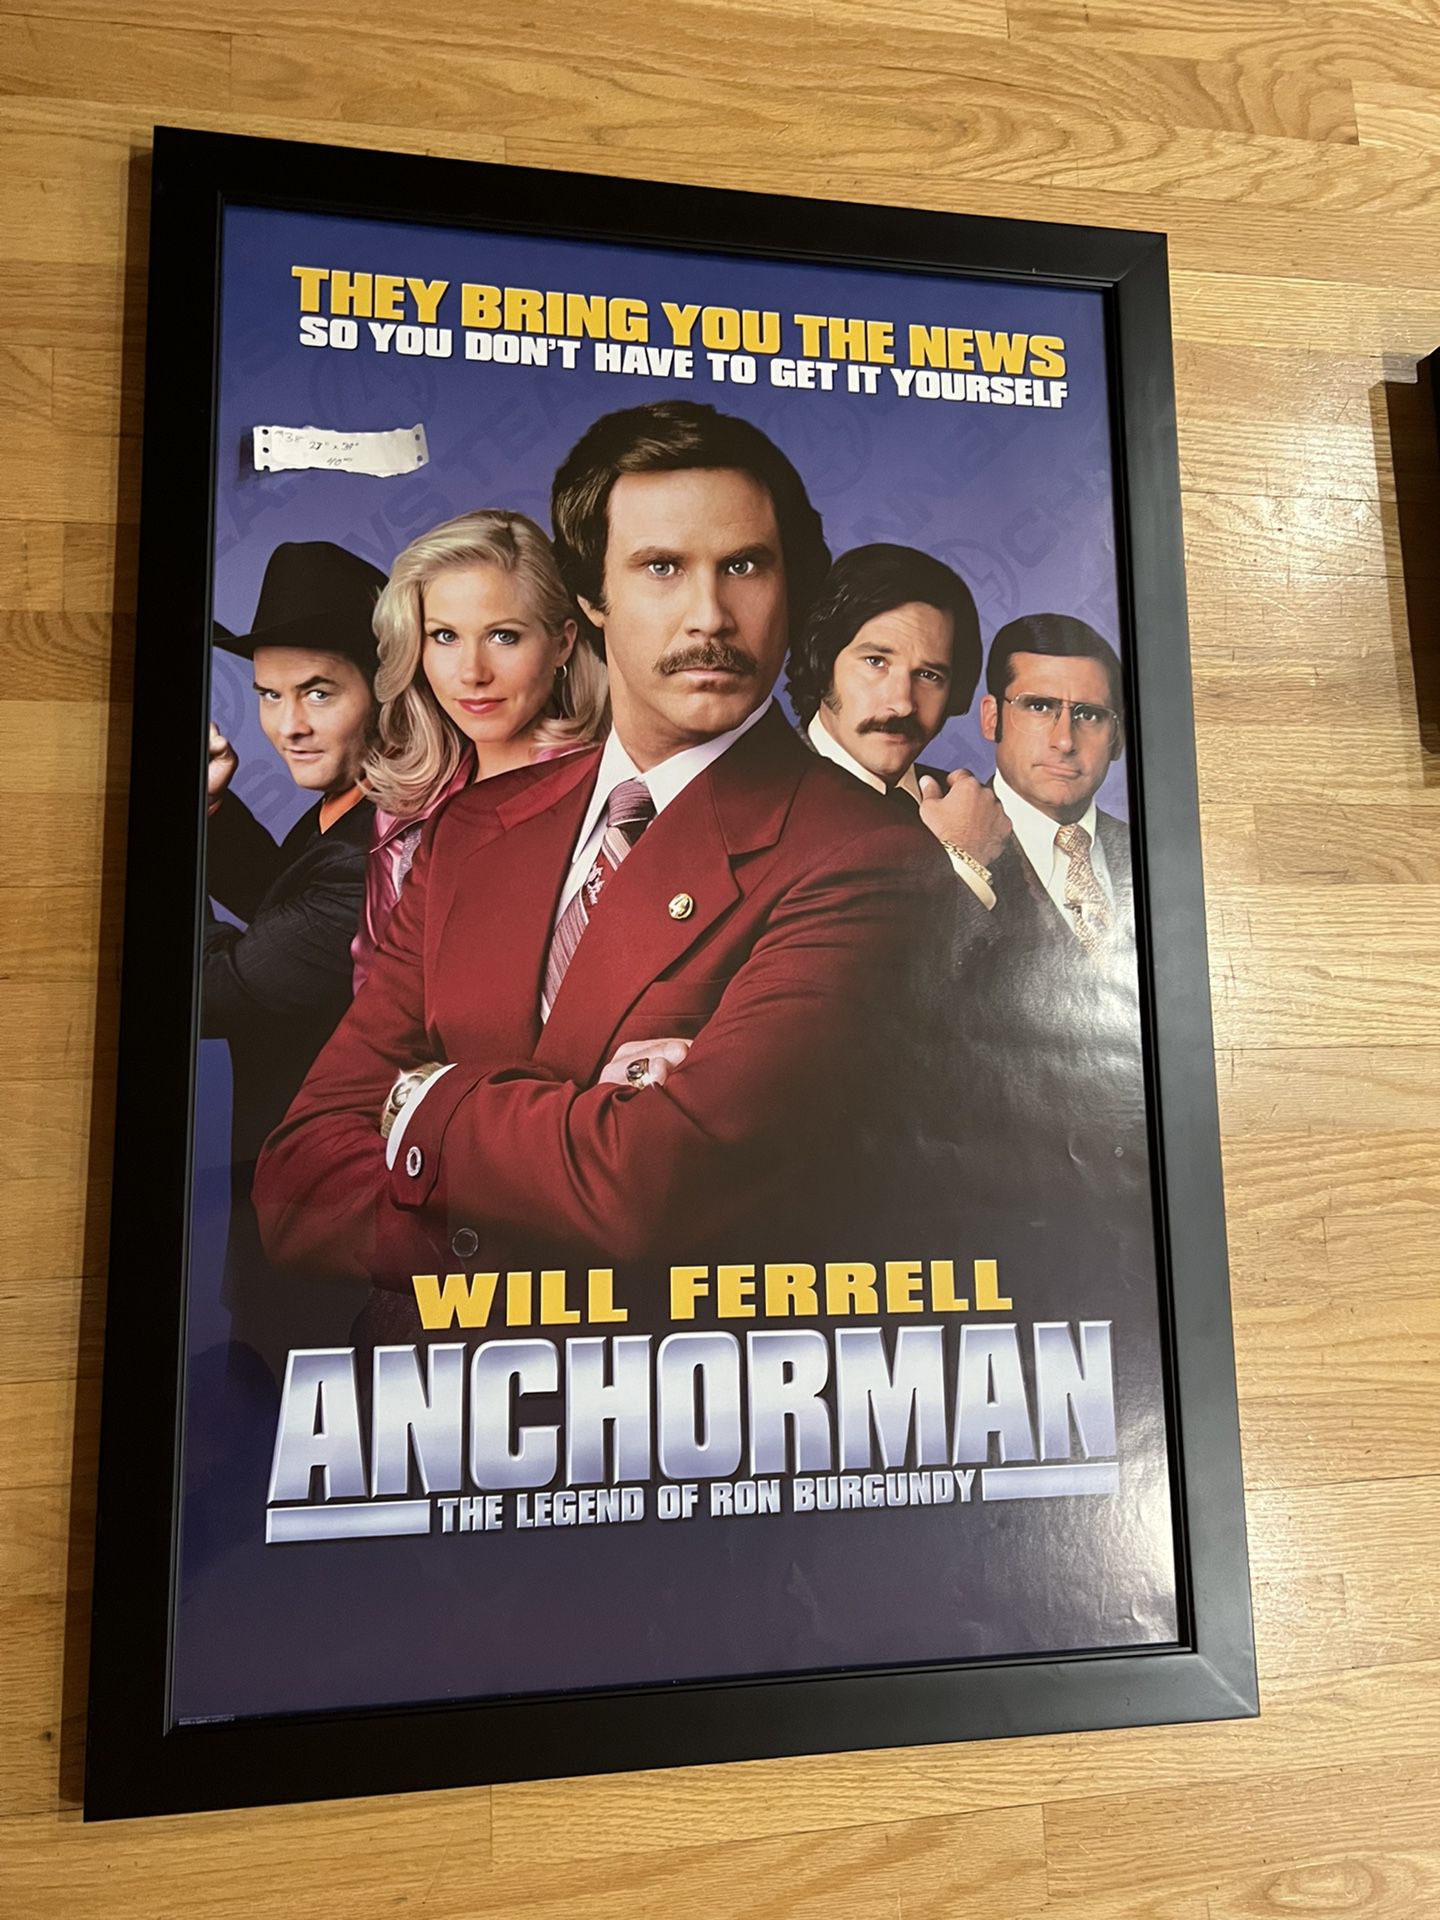 Too Much Fun With These Framed Movie Posters